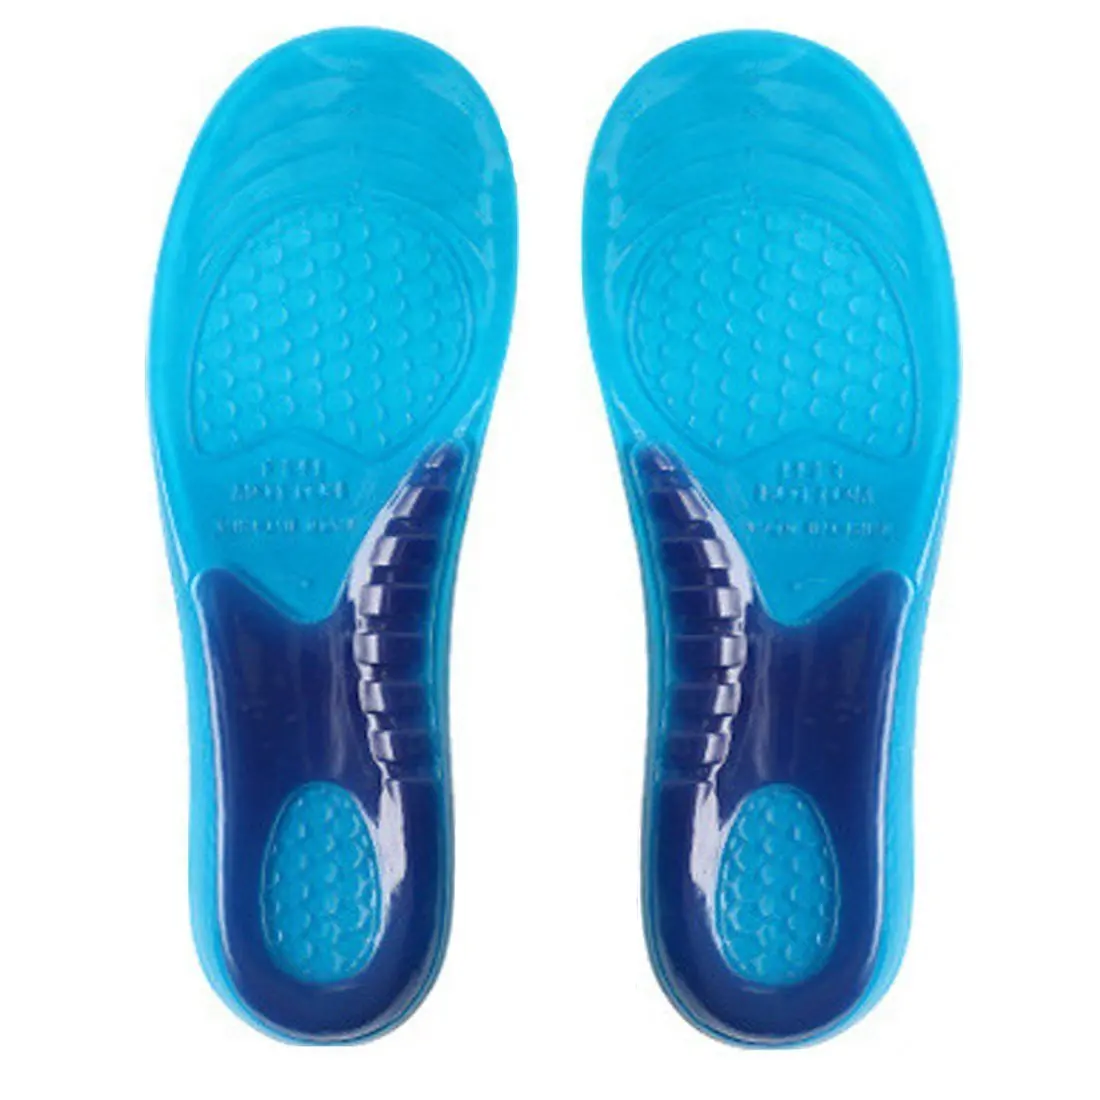 new insoles for crocs